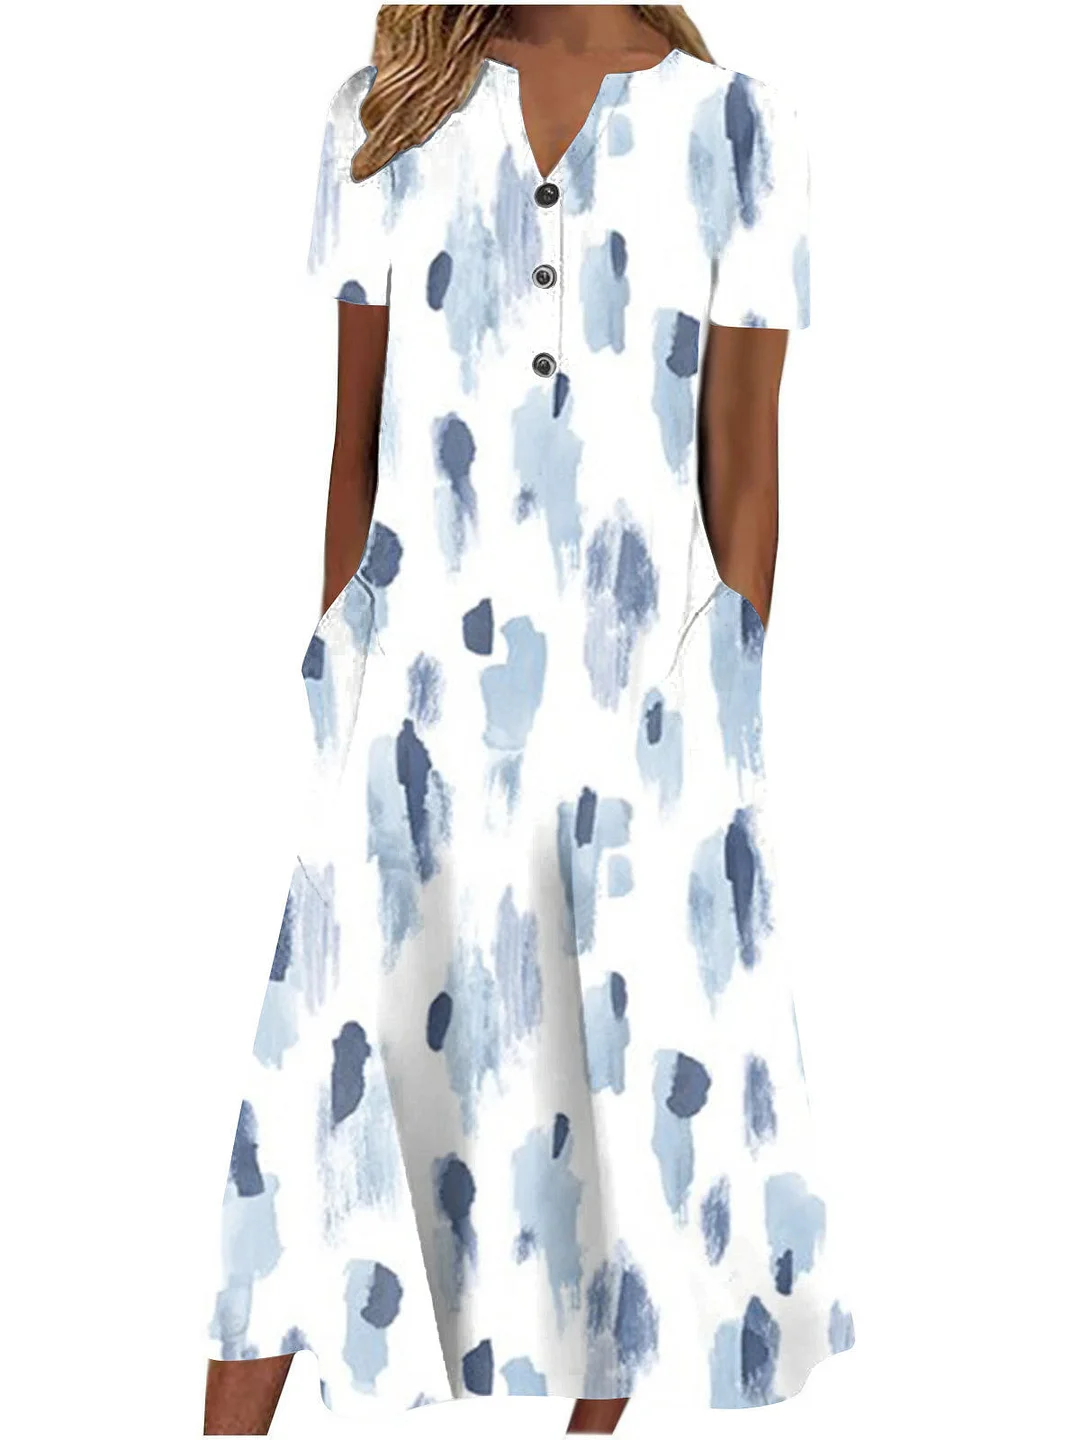 Women's Floral Printed Graphic V-neck Sleevedless Maxi Dress